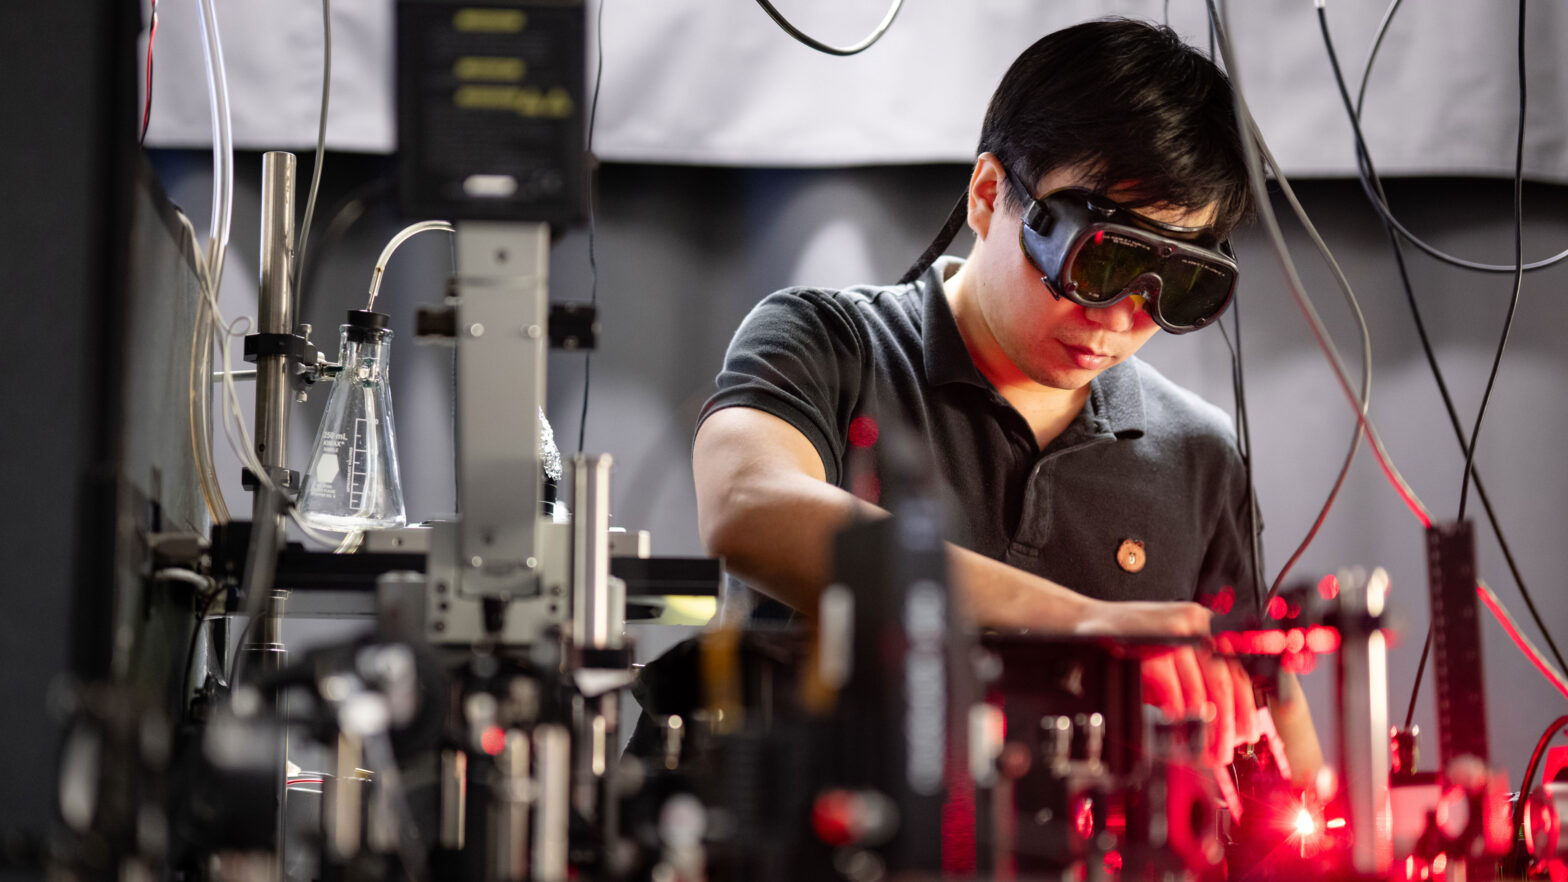 Researcher wearing goggles operates a laser surrounded by lab equipment